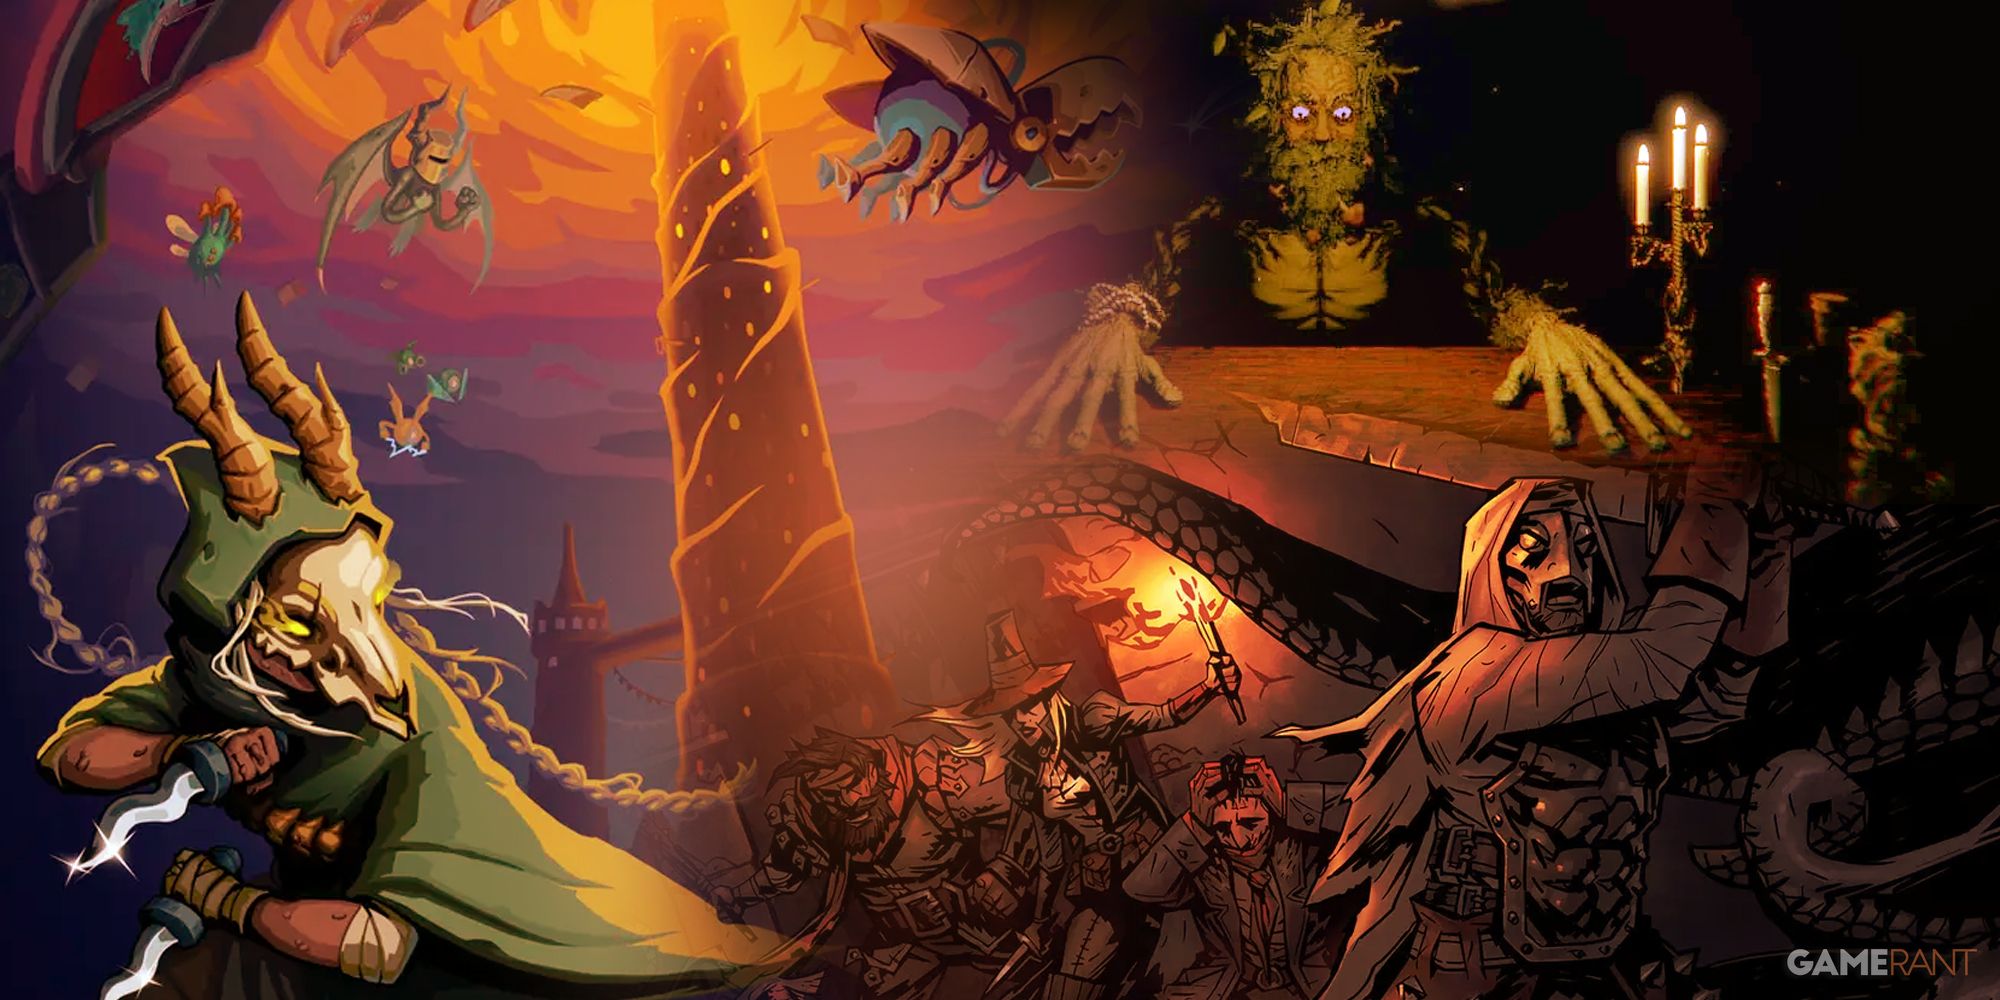 Roguelike Strategy Games Slay The Spire, Inscryption, Darkest Dungeon